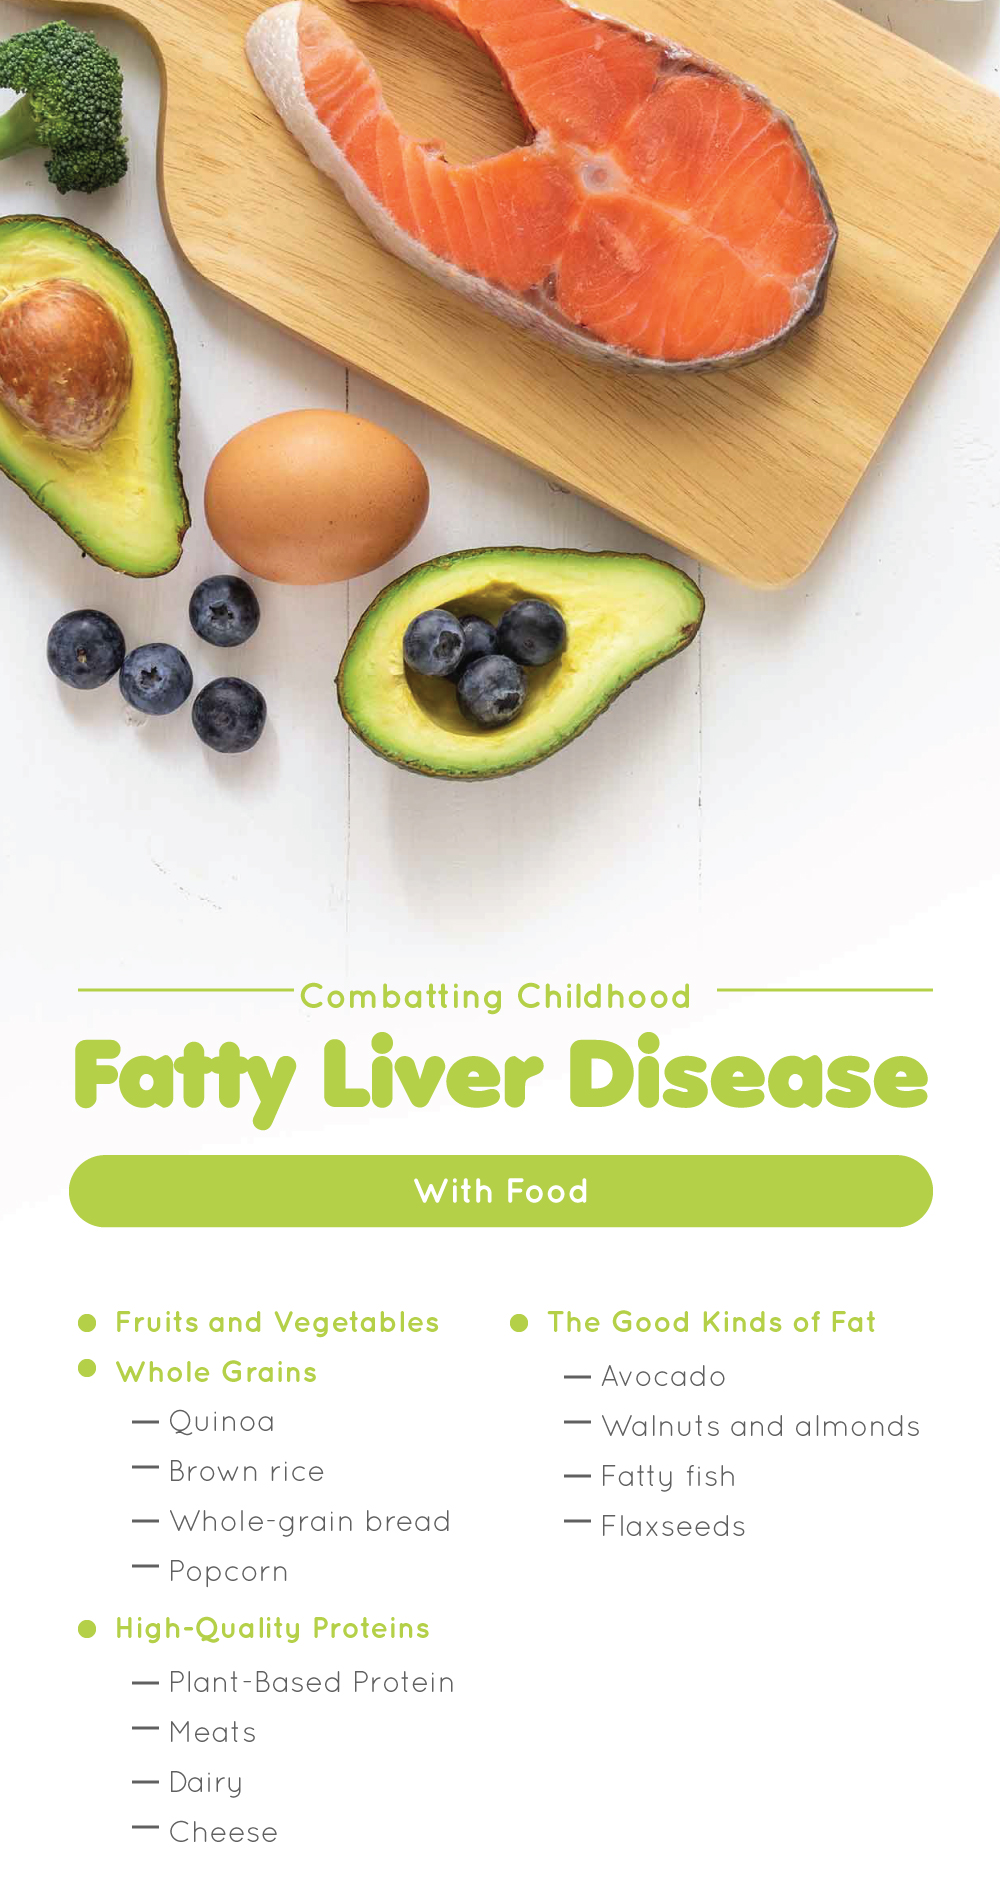 Combatting Childhood Fatty Liver Disease With Food